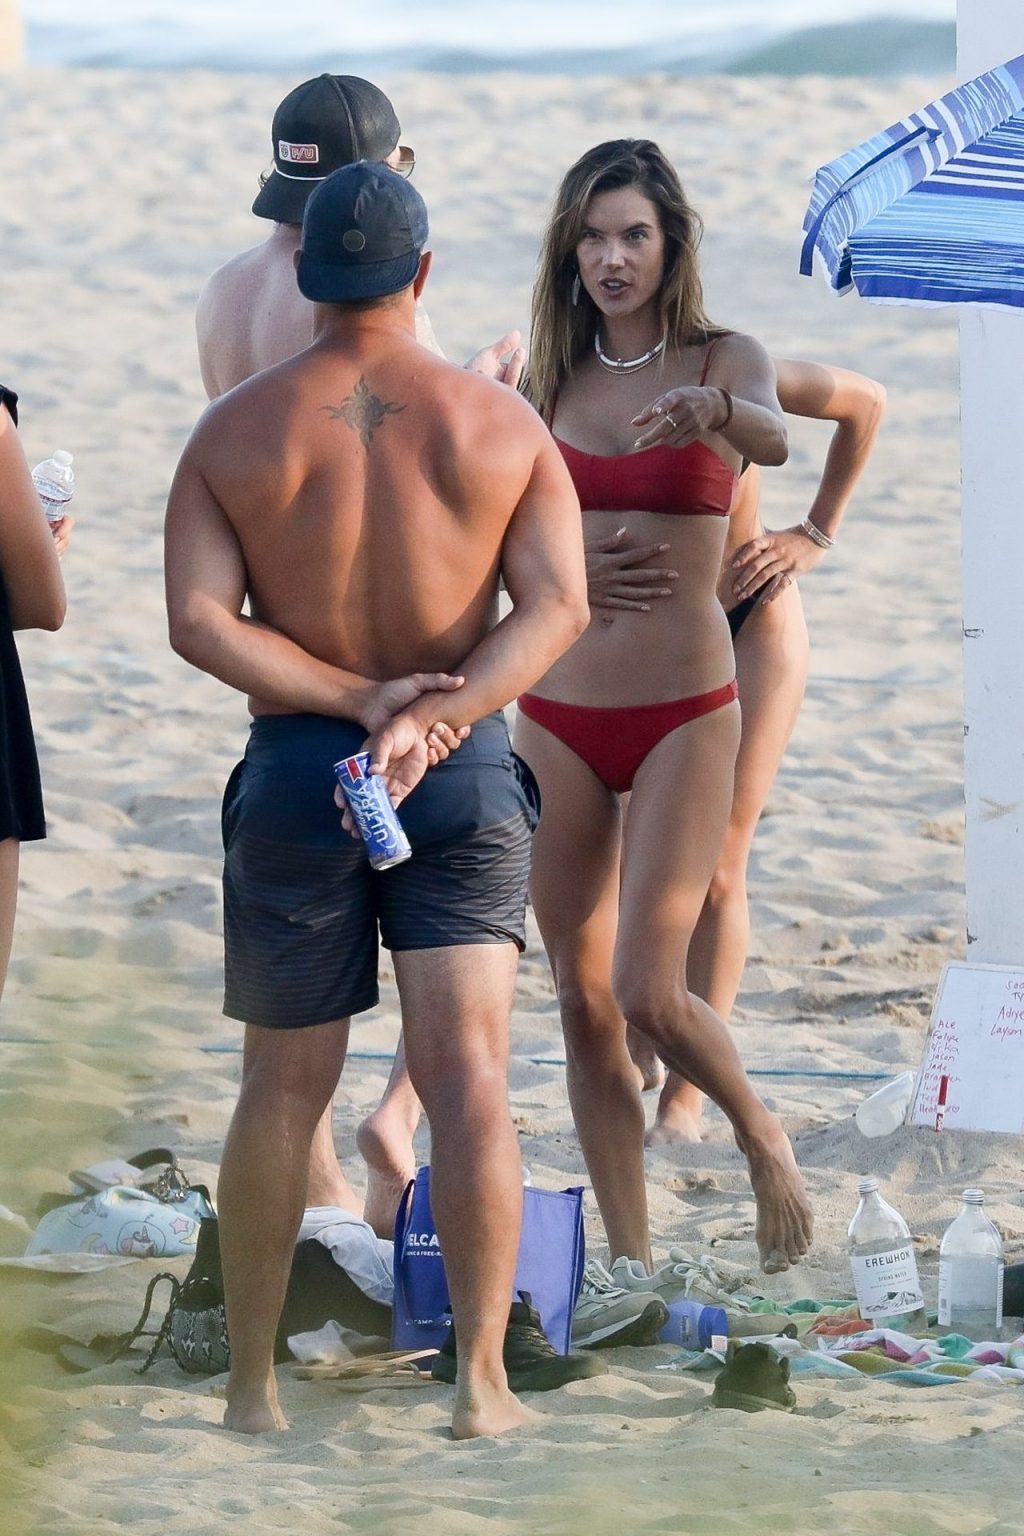 Alessandra Ambrosio Enjoys a Fun Day at the beach with Her Friends (138 Photos)